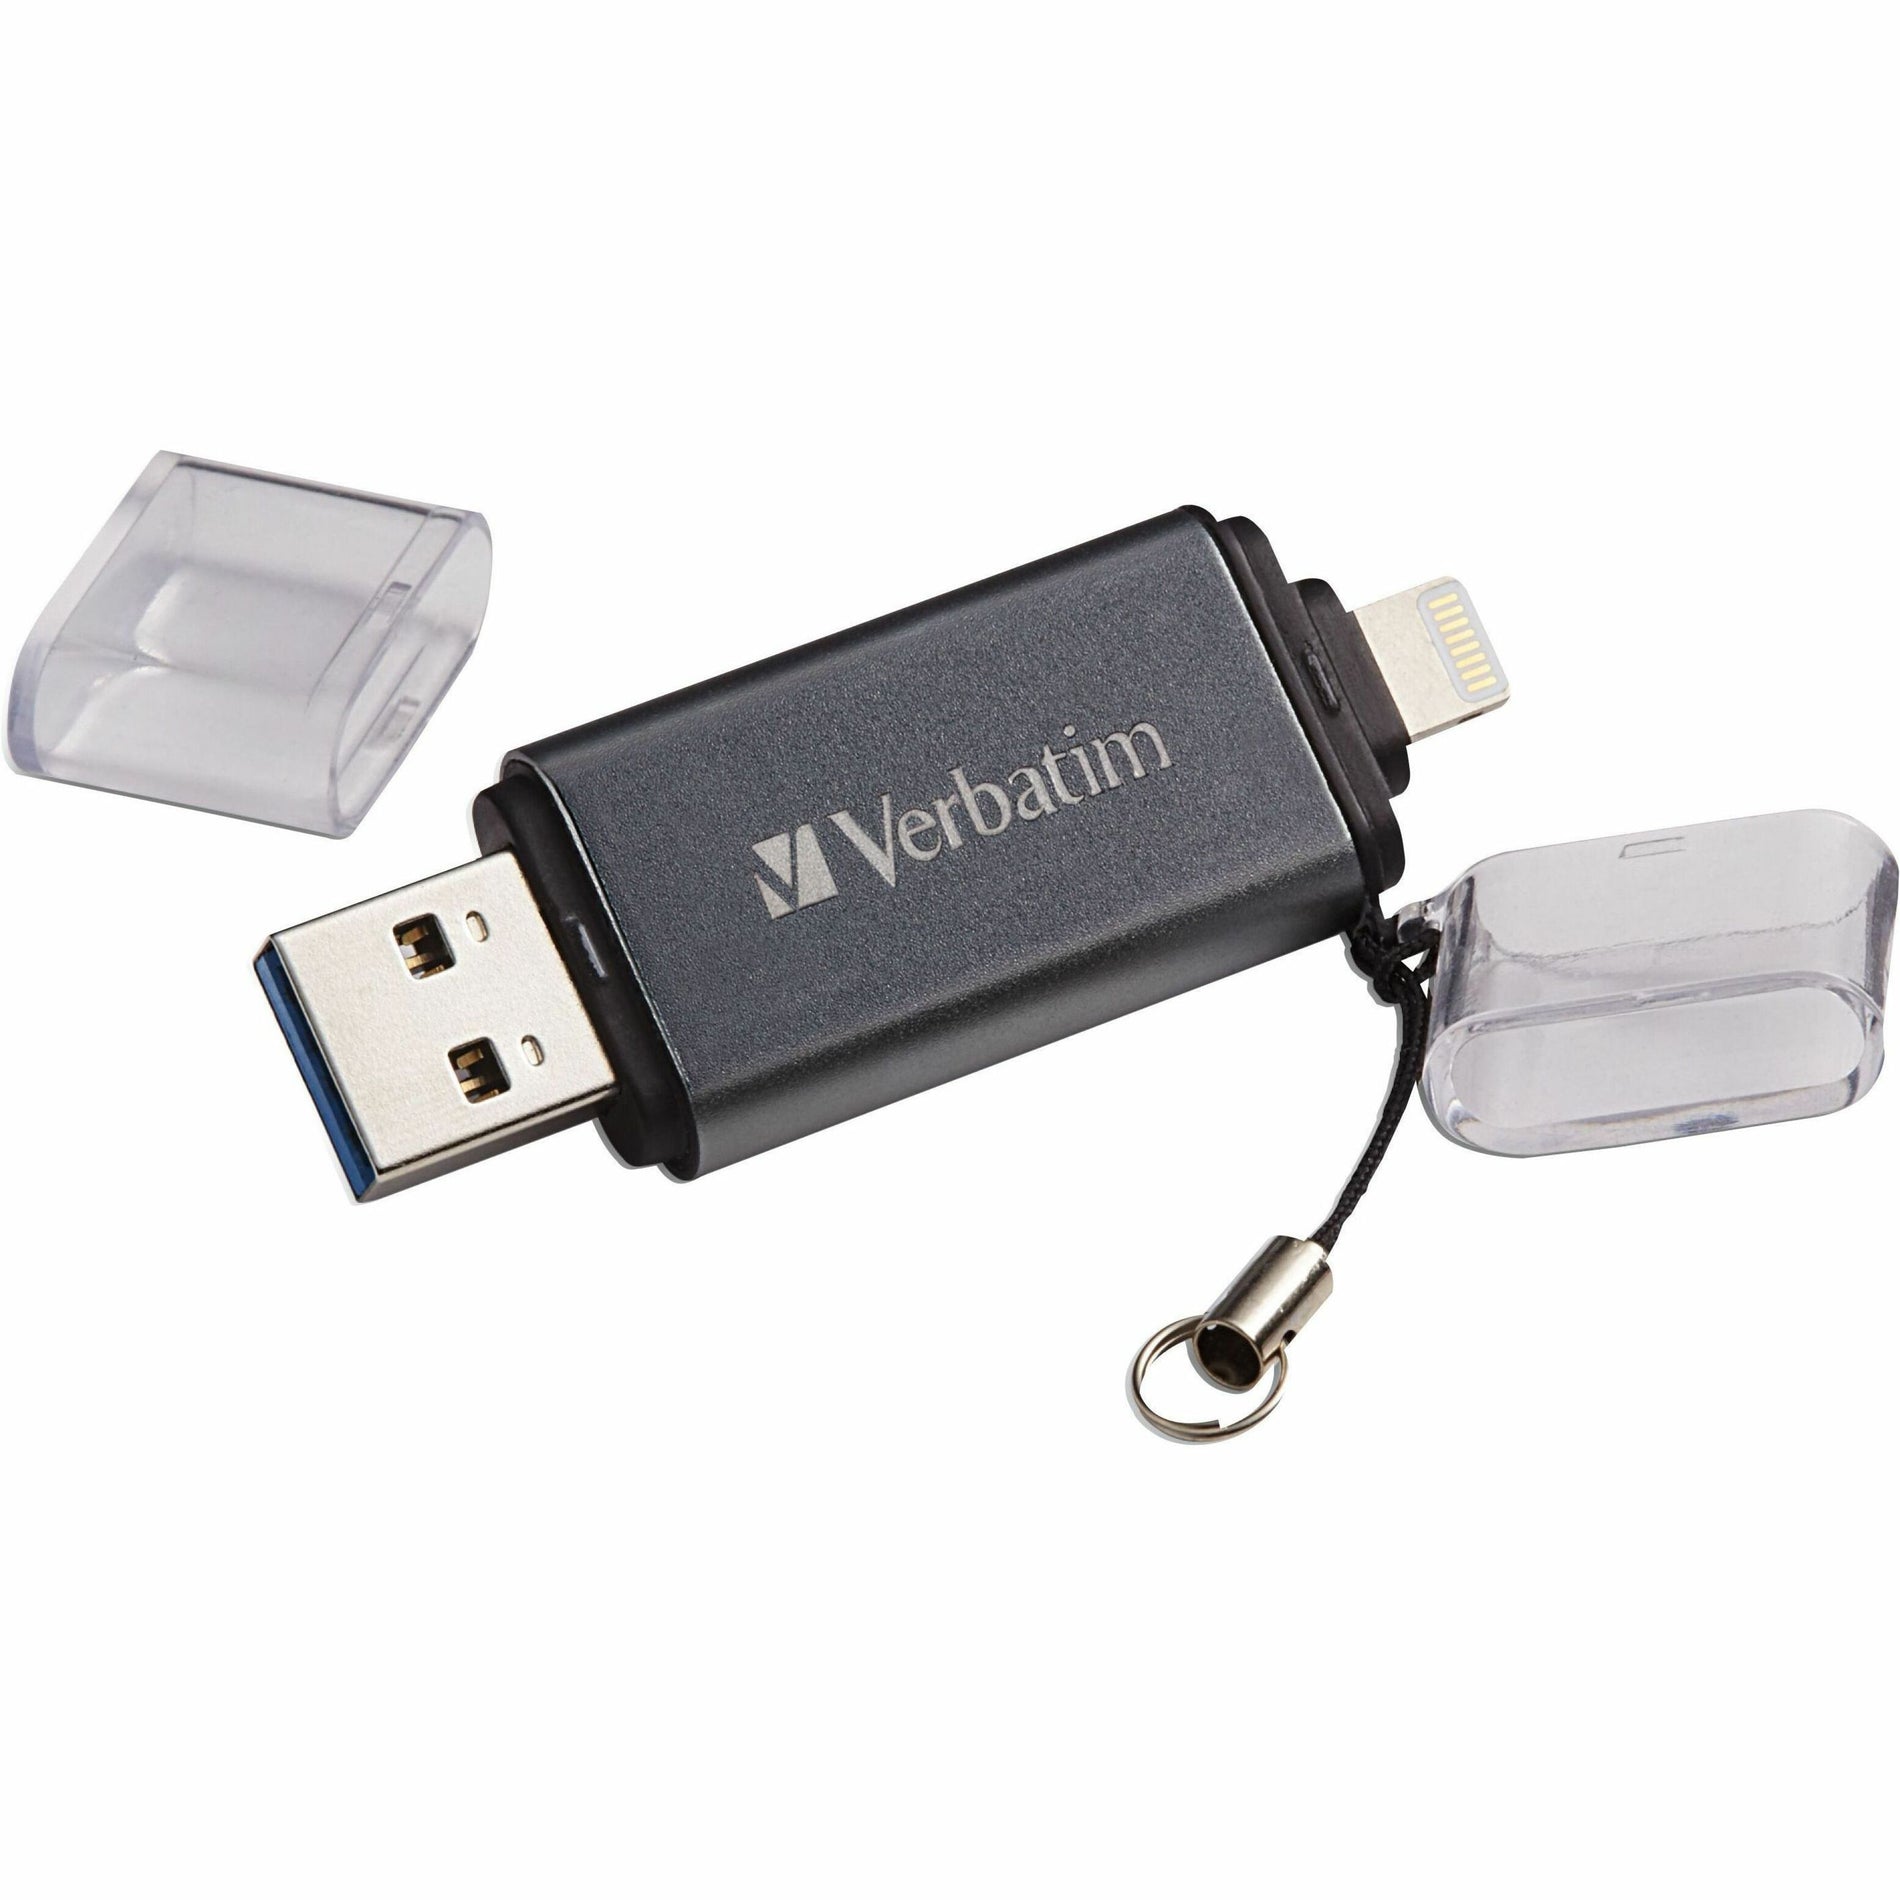 Verbatim 71276 Store 'n' Go Dual 128GB USB 3.2 (Gen 1) Type A Flash Drive, Graphite - For Apple Lightning Devices